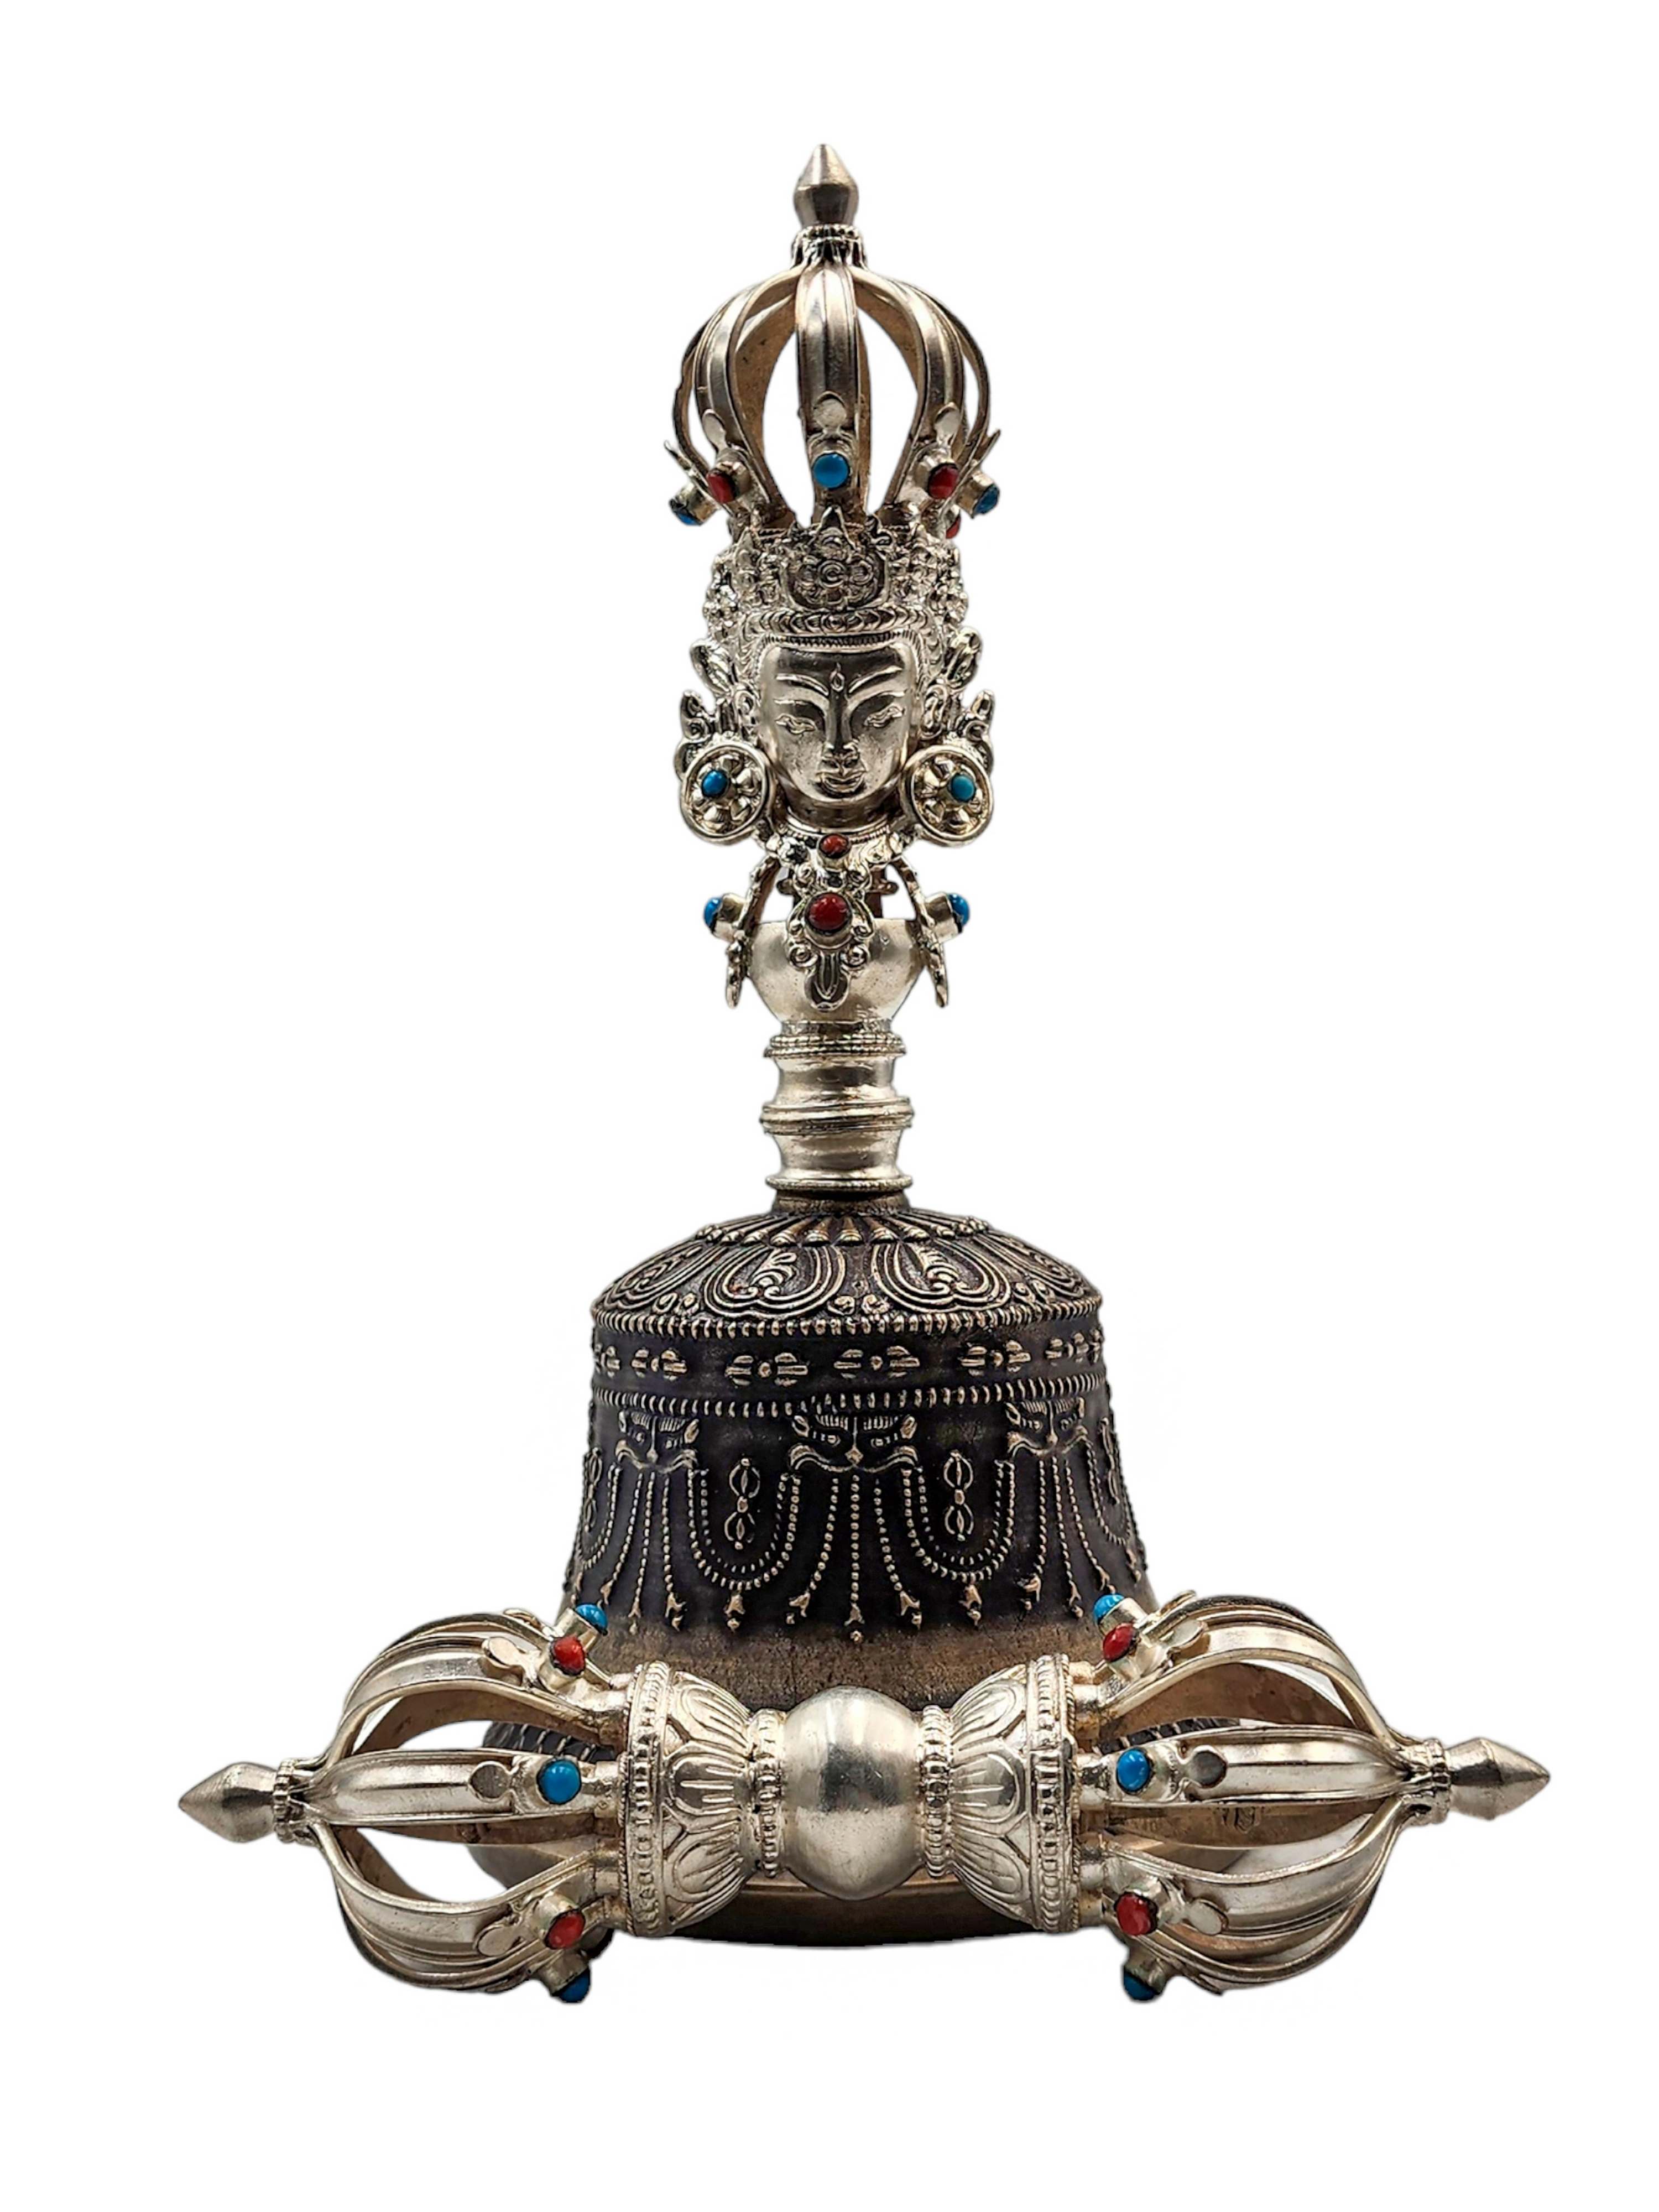 Bell And Dorje vajra, high Quality, Antique Finishing, silver Plated